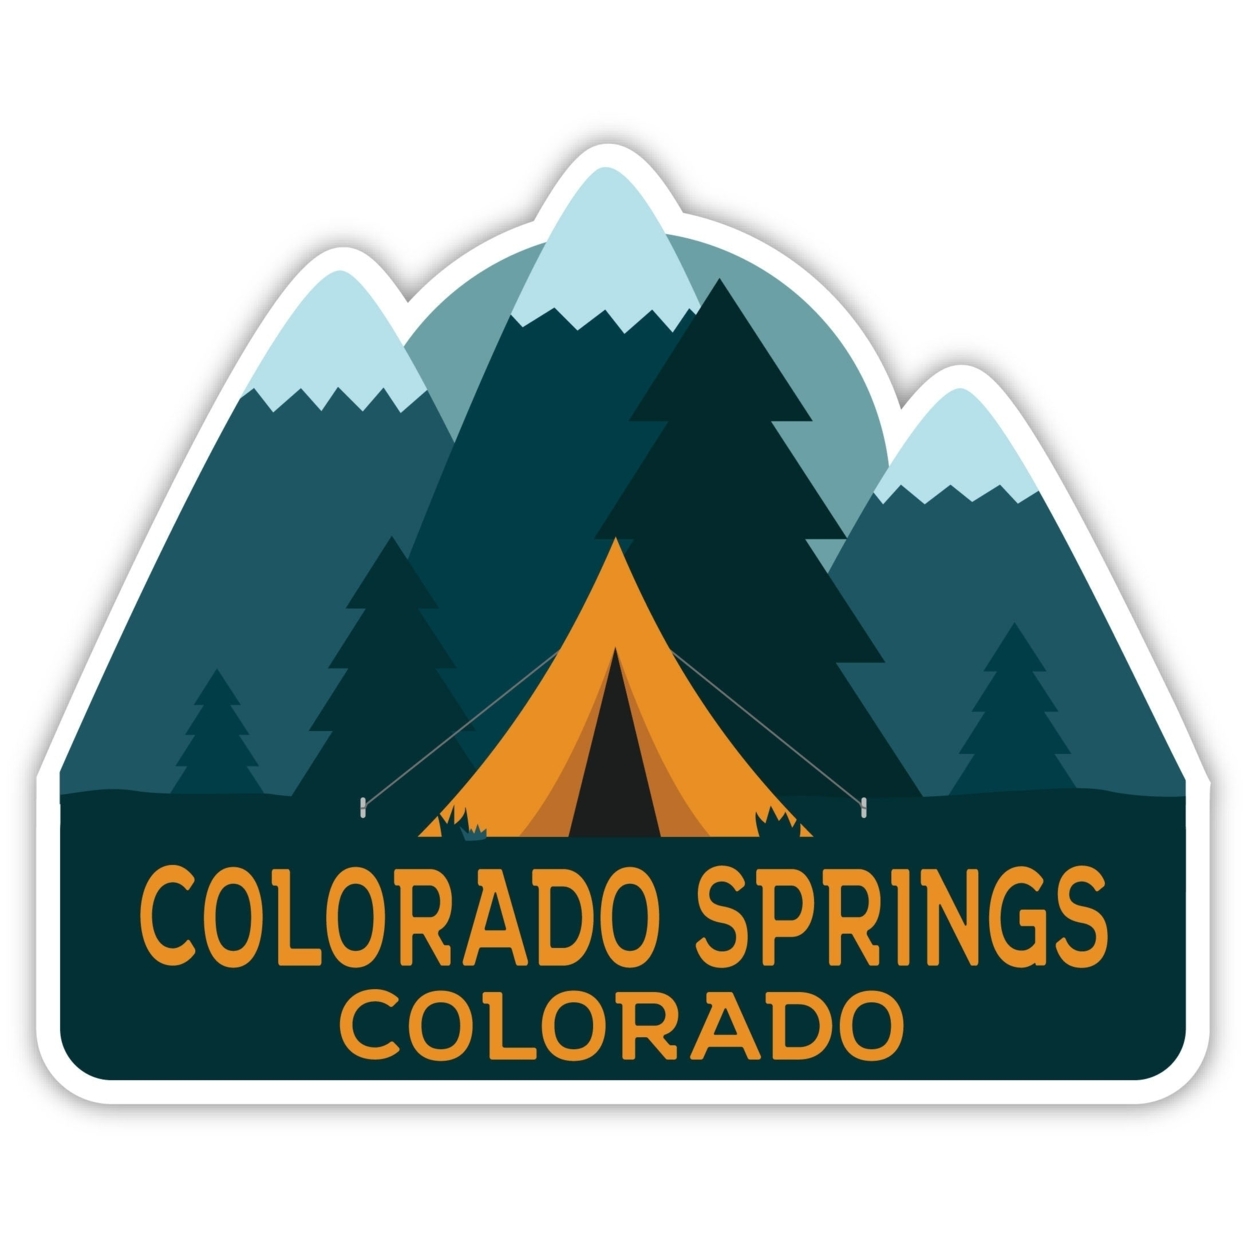 Colorado Springs Colorado Souvenir Decorative Stickers (Choose Theme And Size) - 4-Pack, 4-Inch, Great Outdoors